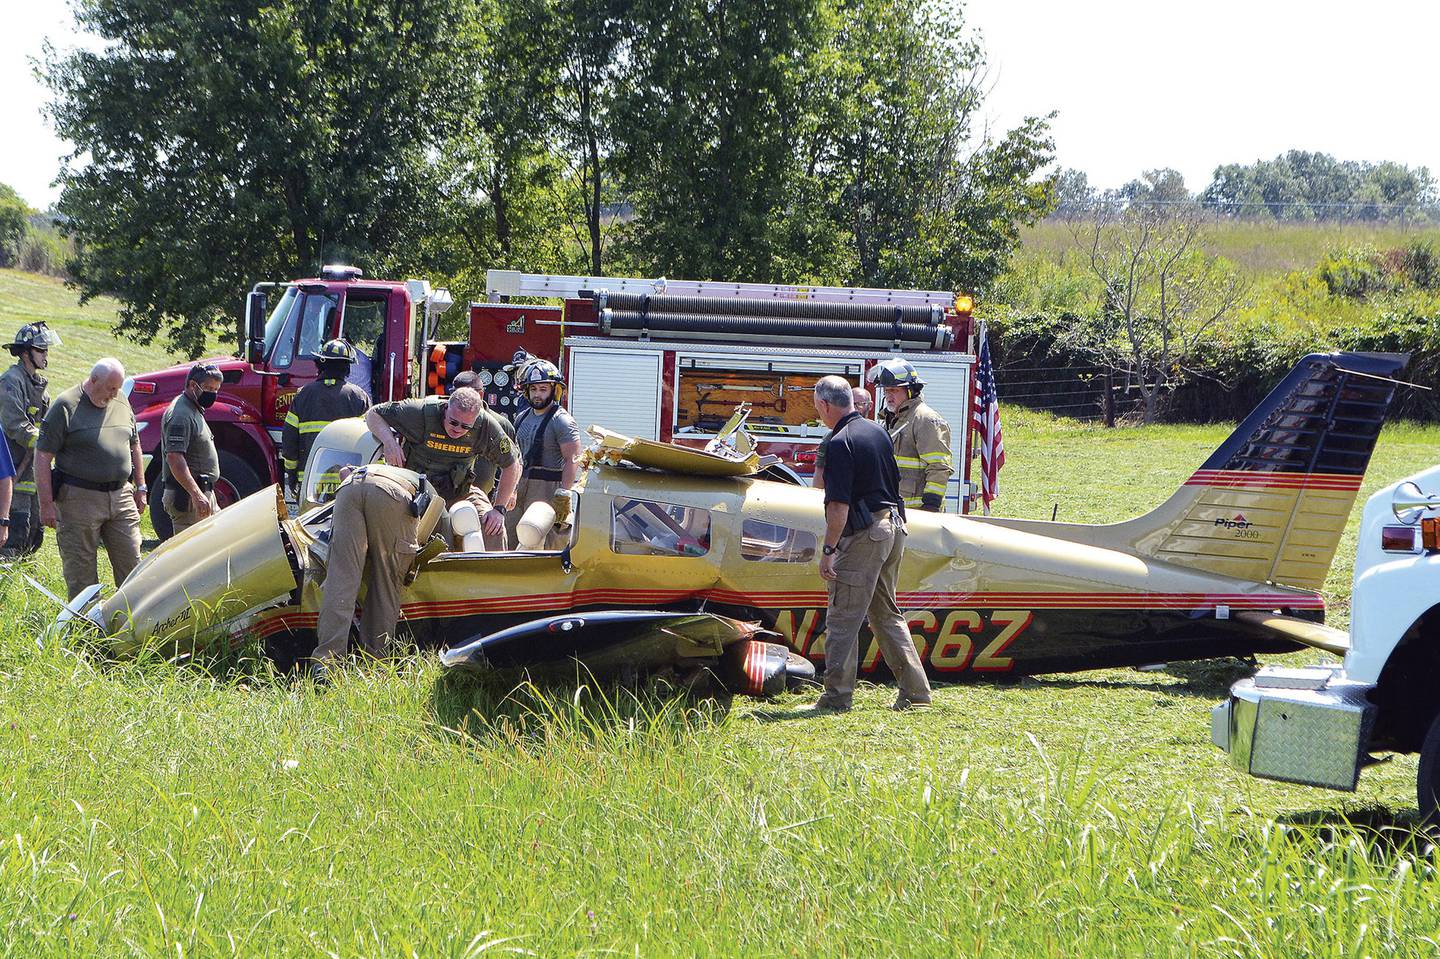 Investigators examine a single-engine Piper that crashed in a field off Airport Lake Road on Tuesday, Sept. 8, 2020, near Warren County Memorial Airport in McMinnville, Tenn.